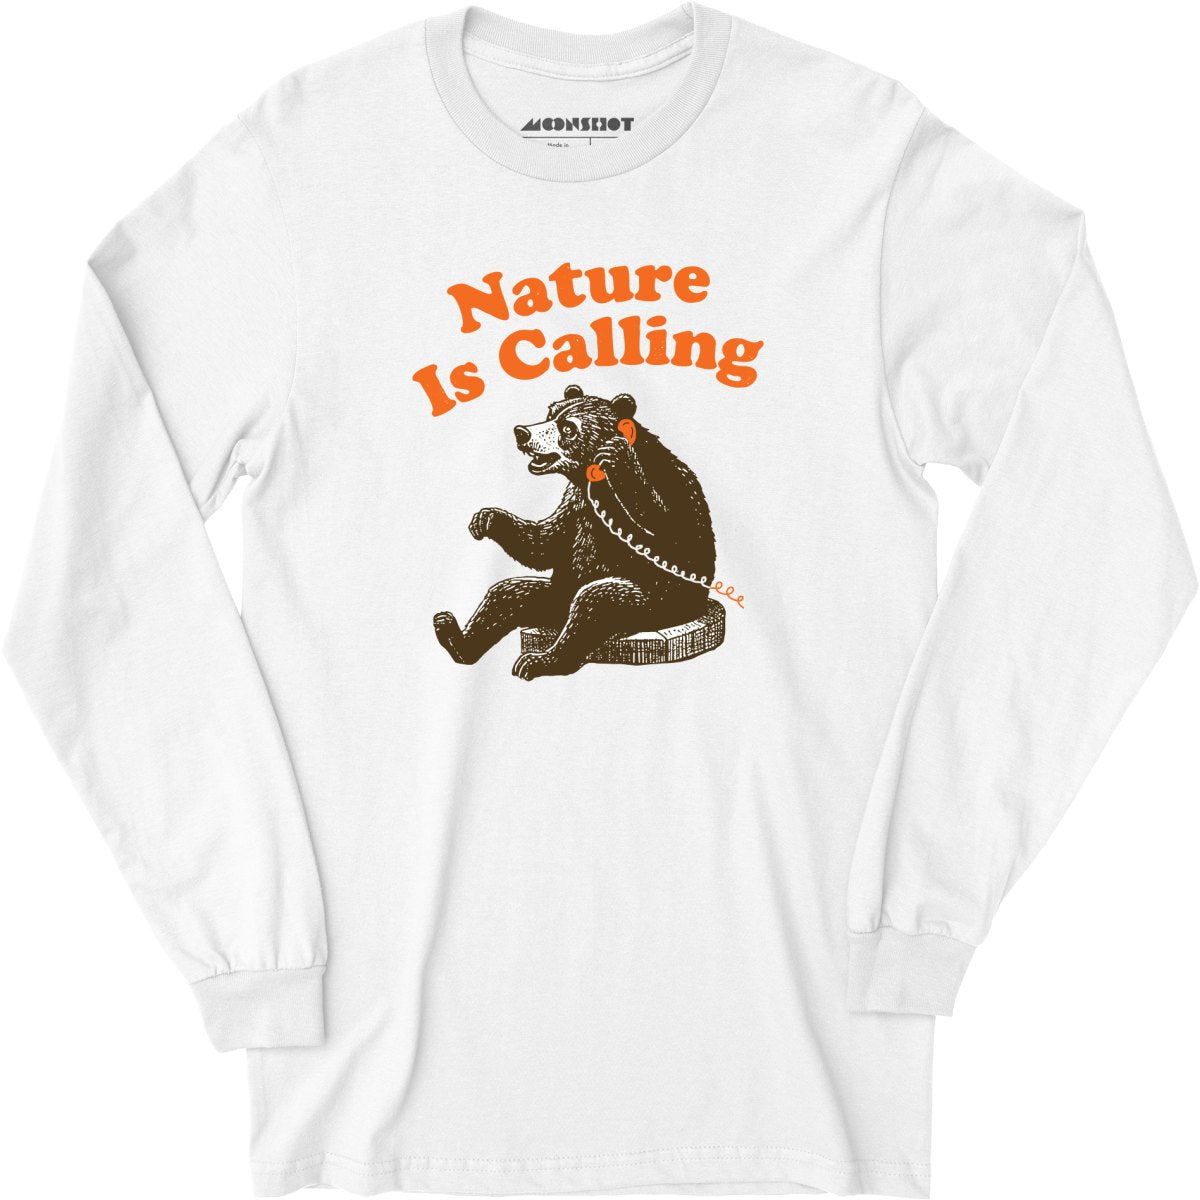 Nature is Calling - Long Sleeve T-Shirt